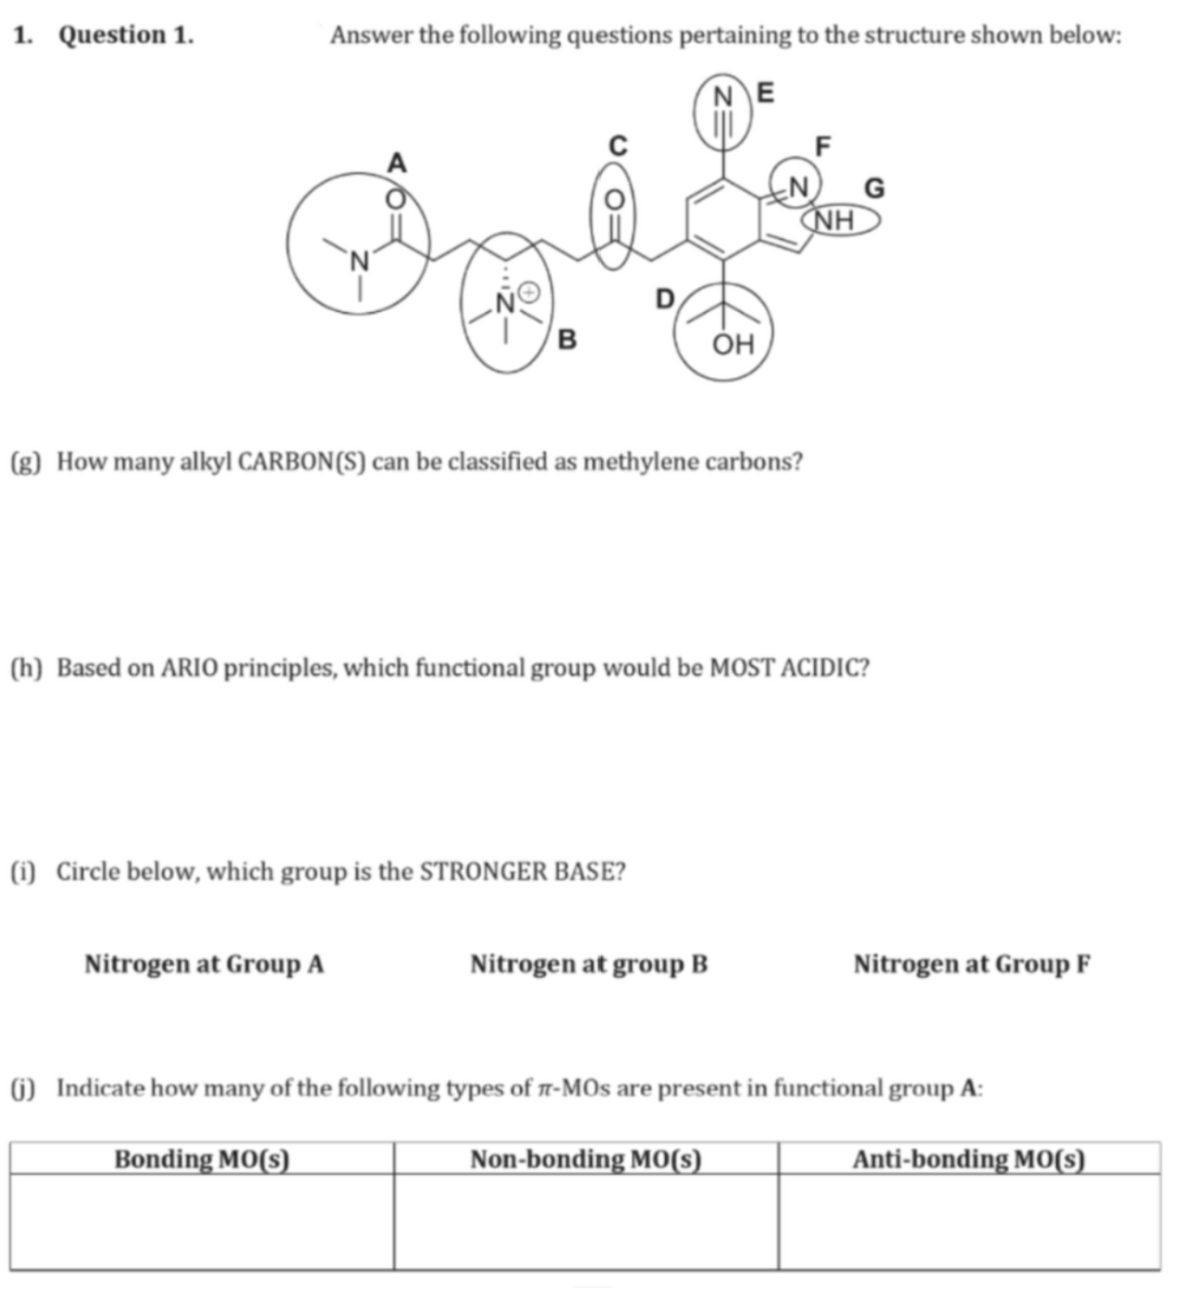 1. Question 1.
Answer the following questions pertaining to the structure shown below:
NE
B
OH
(g) How many alkyl CARBON(S) can be classified as methylene carbons?
F
G
NH
(h) Based on ARIO principles, which functional group would be MOST ACIDIC?
(i) Circle below, which group is the STRONGER BASE?
Nitrogen at Group A
Nitrogen at group B
Nitrogen at Group F
(j) Indicate how many of the following types of л-MOs are present in functional group A:
Bonding MO(s)
Non-bonding MO(s)
Anti-bonding MO(s)